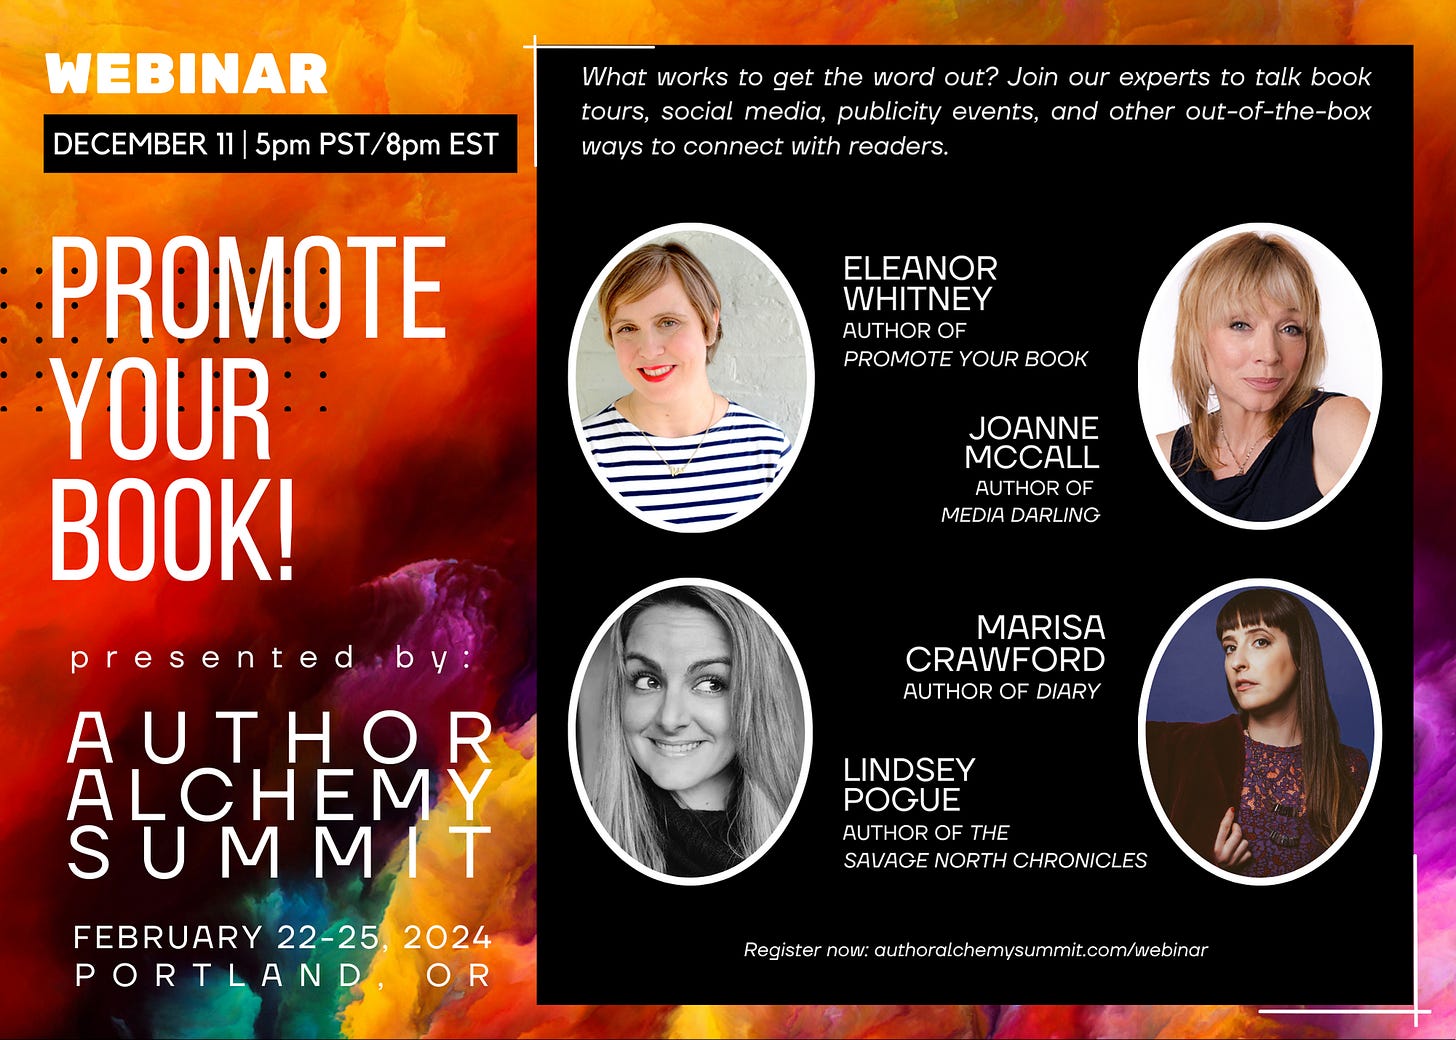 Webinar: December 11 5pm PST/8pm EST. Promote Your Book! Presented by Author Alchemy Summit